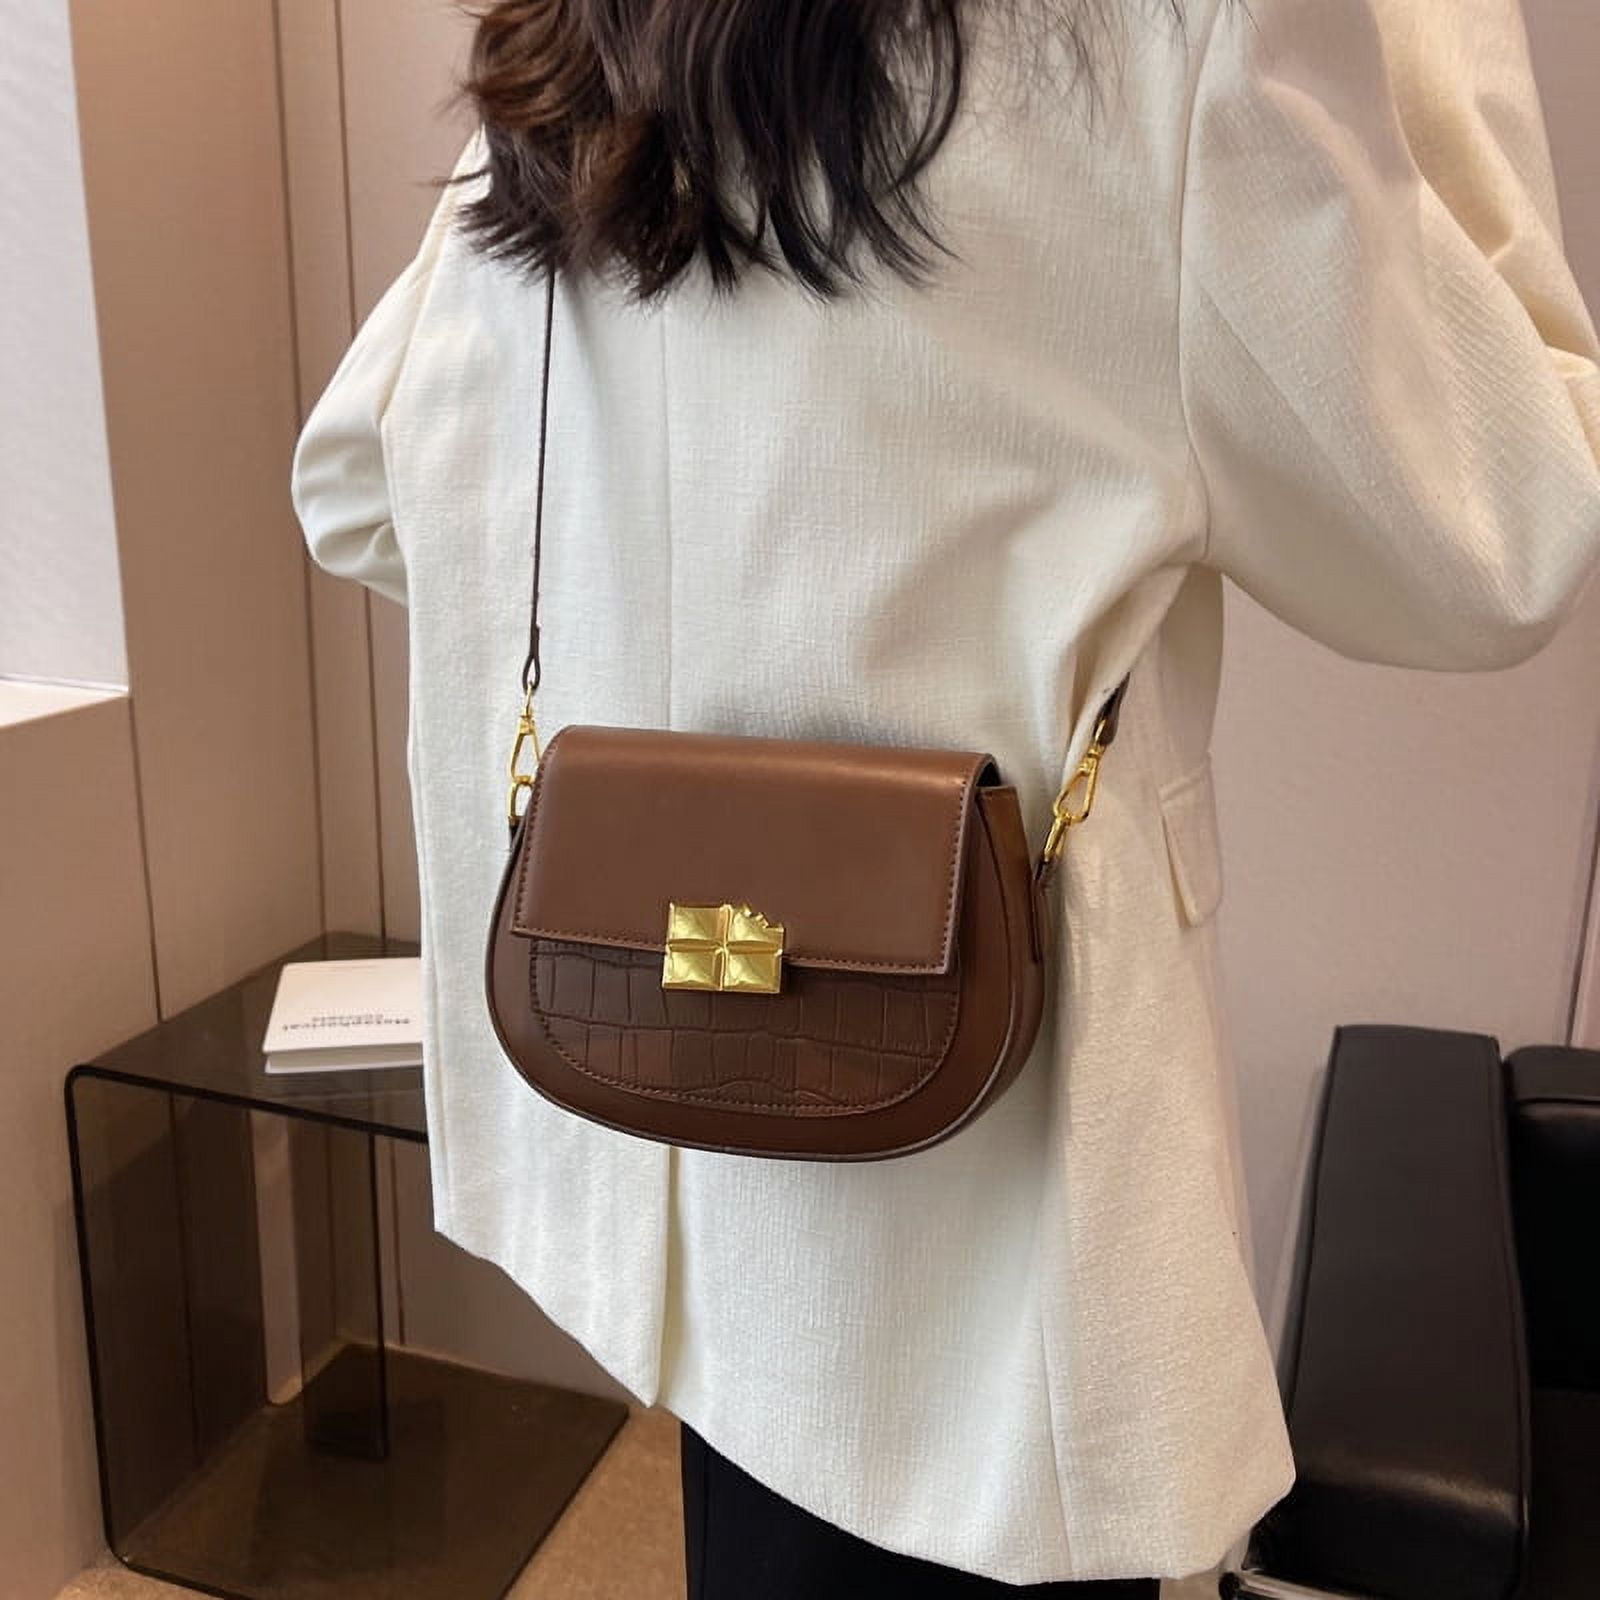 QWZNDZGR Leisure Small Bag Women's Bag 2022 New Autumn And Winter